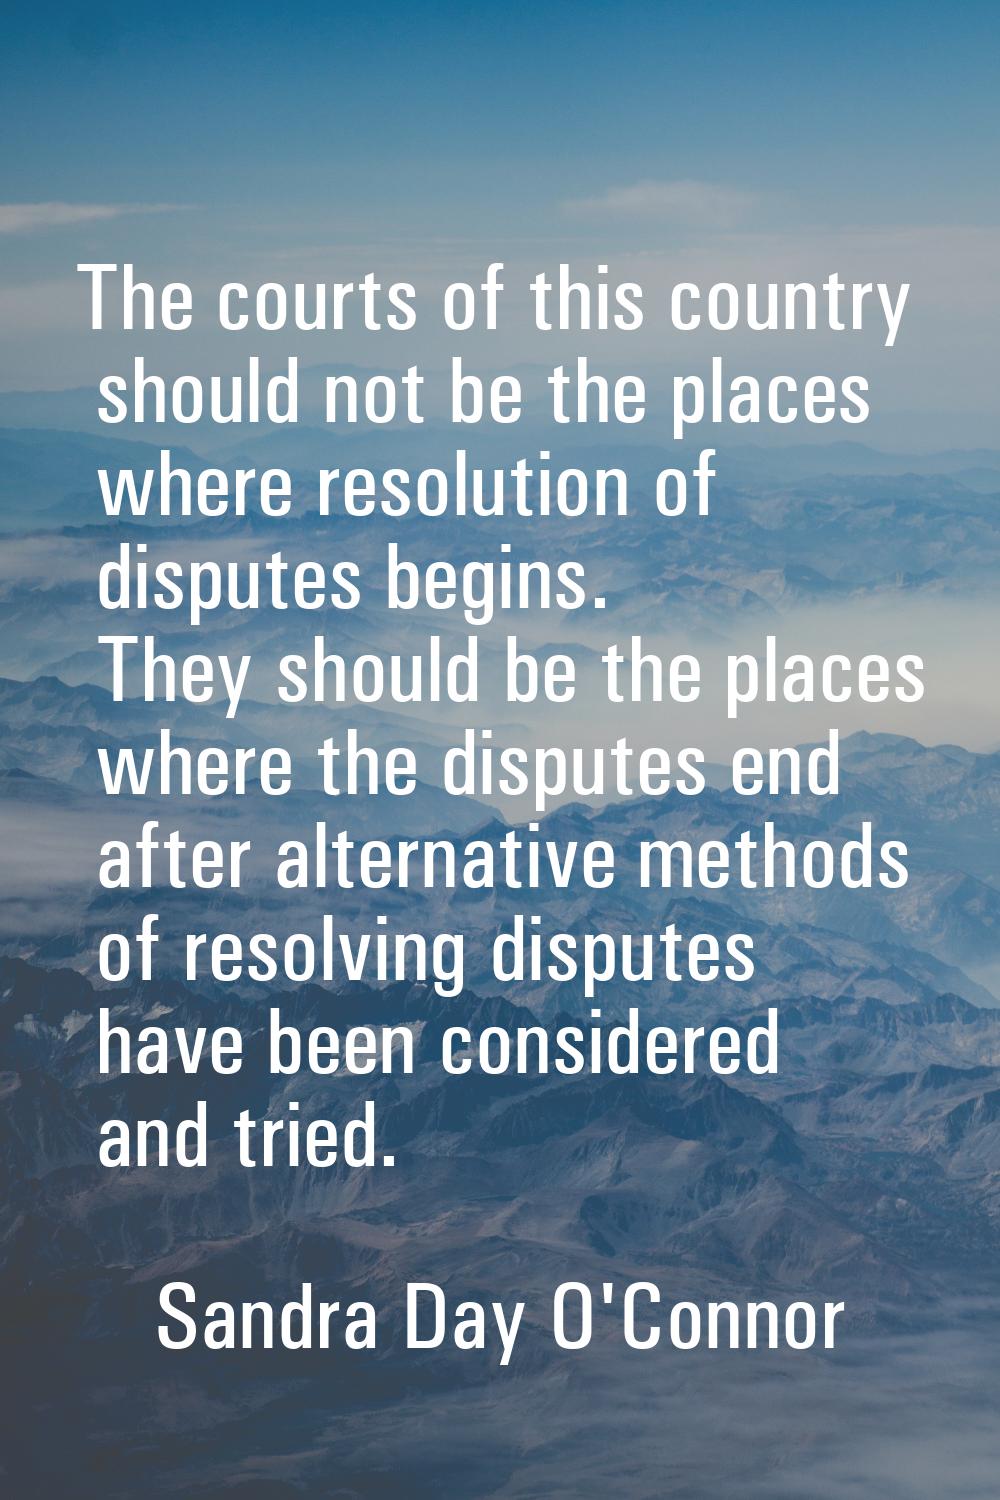 The courts of this country should not be the places where resolution of disputes begins. They shoul